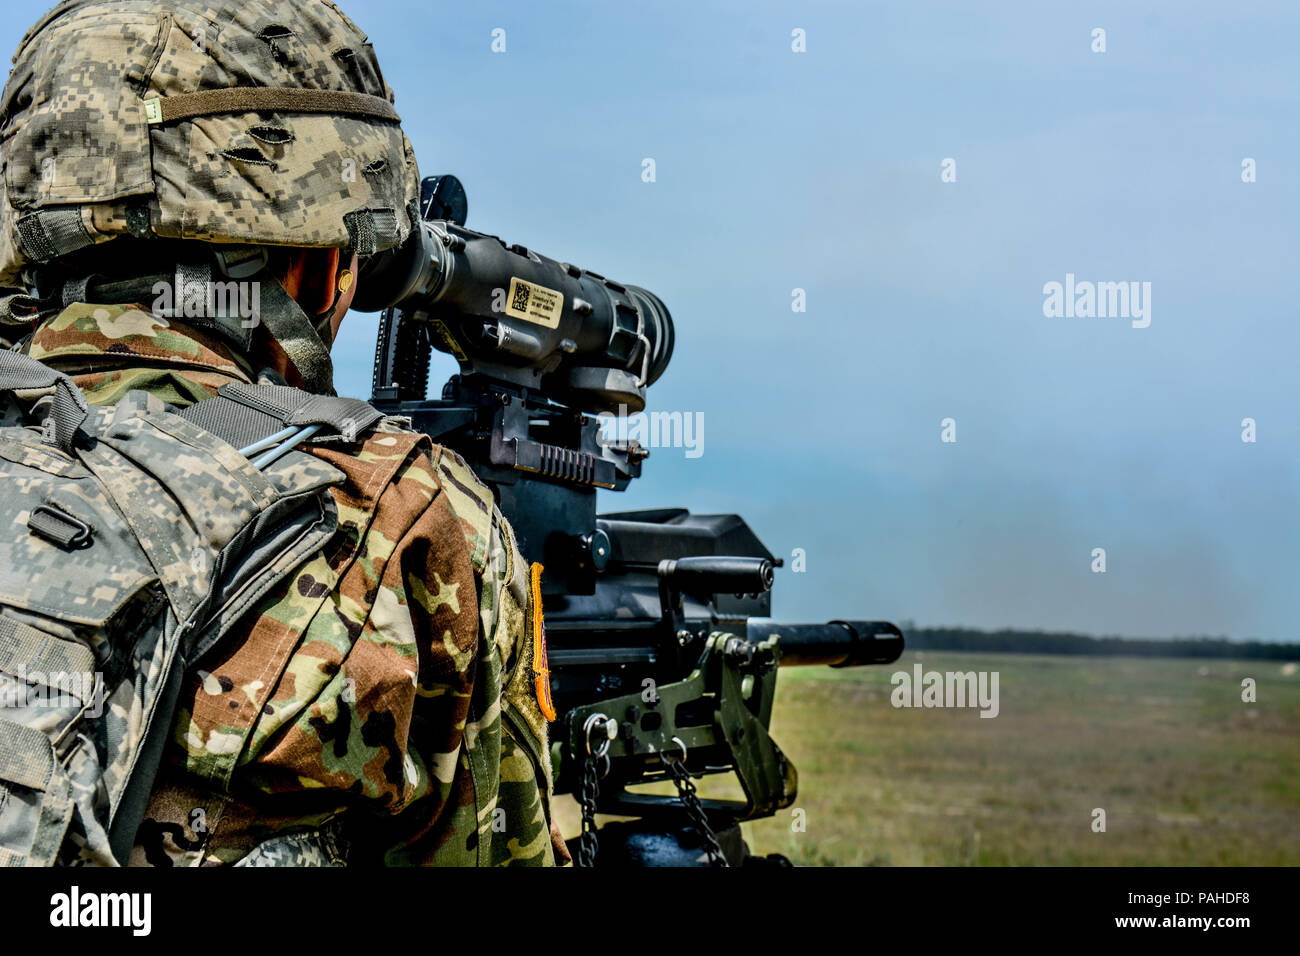 A U.S. Army Reserve Troop List Unit Soldier qualifies with a Mark 19 40 mm grenade machine gun during Operation Cold Steel II, hosted by U.S. Army Civil Affairs and Psychological Operations Command (Airborne), July 13, 2018 at Joint Base McGuire-Dix-Lakehurst, N.J. Operation Cold Steel is the U.S. Army Reserve's crew-served weapons qualification and validation exercise to ensure America's Army Reserve units and Soldiers are trained and ready to deploy on short notice as part of Ready Force X and bring combat-ready and lethal firepower in support of the Army and our joint partners anywhere arou Stock Photo